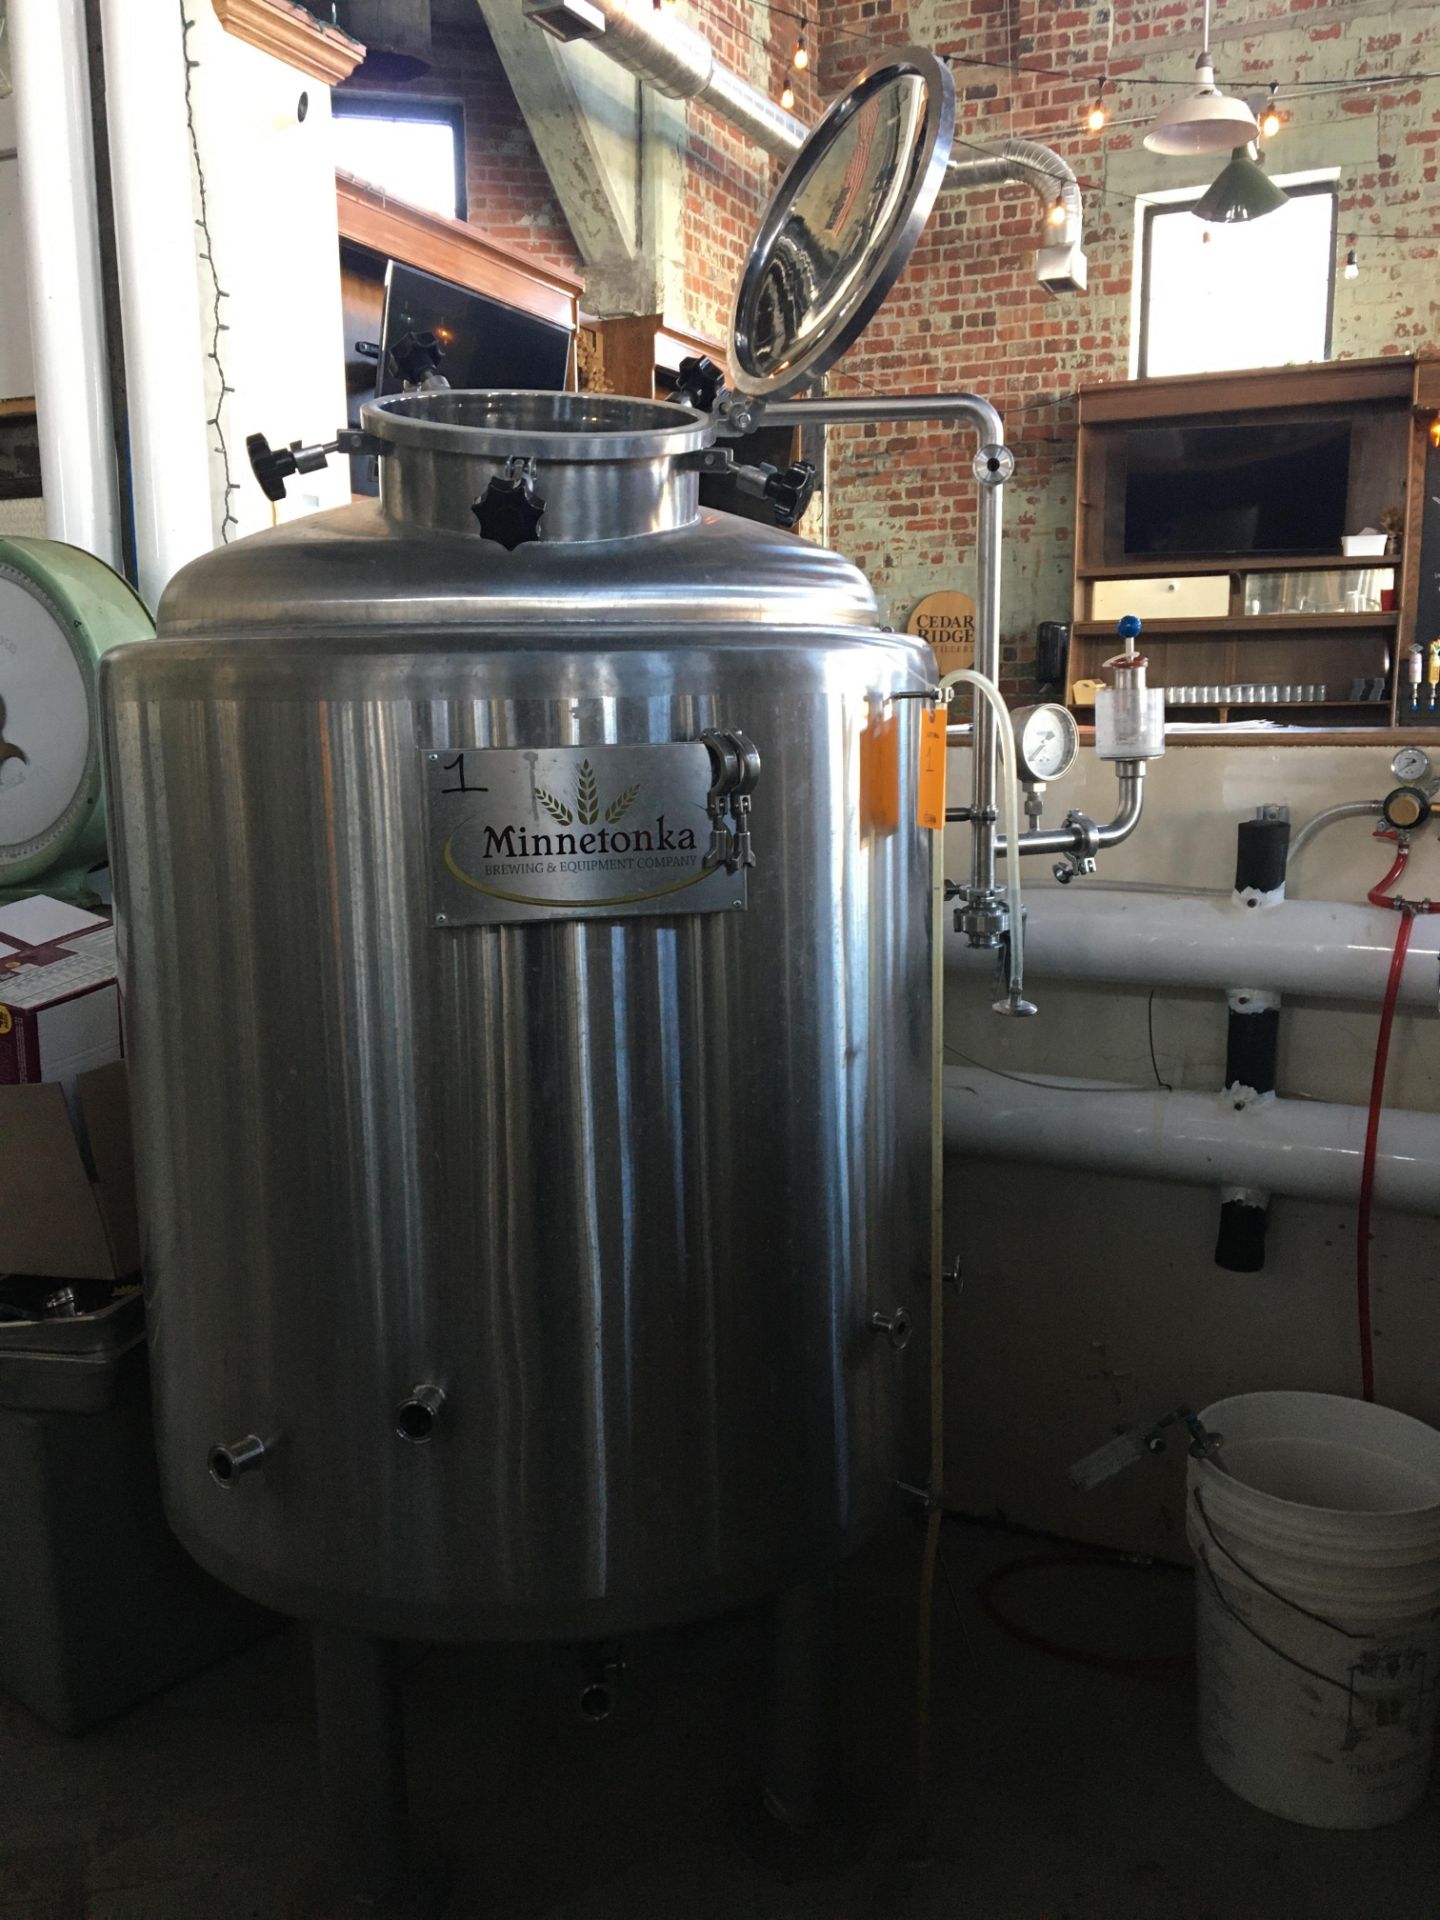 5-BBL Minnetonka Bright Tank, Stainless Steel; storage for finished beer - Image 2 of 8